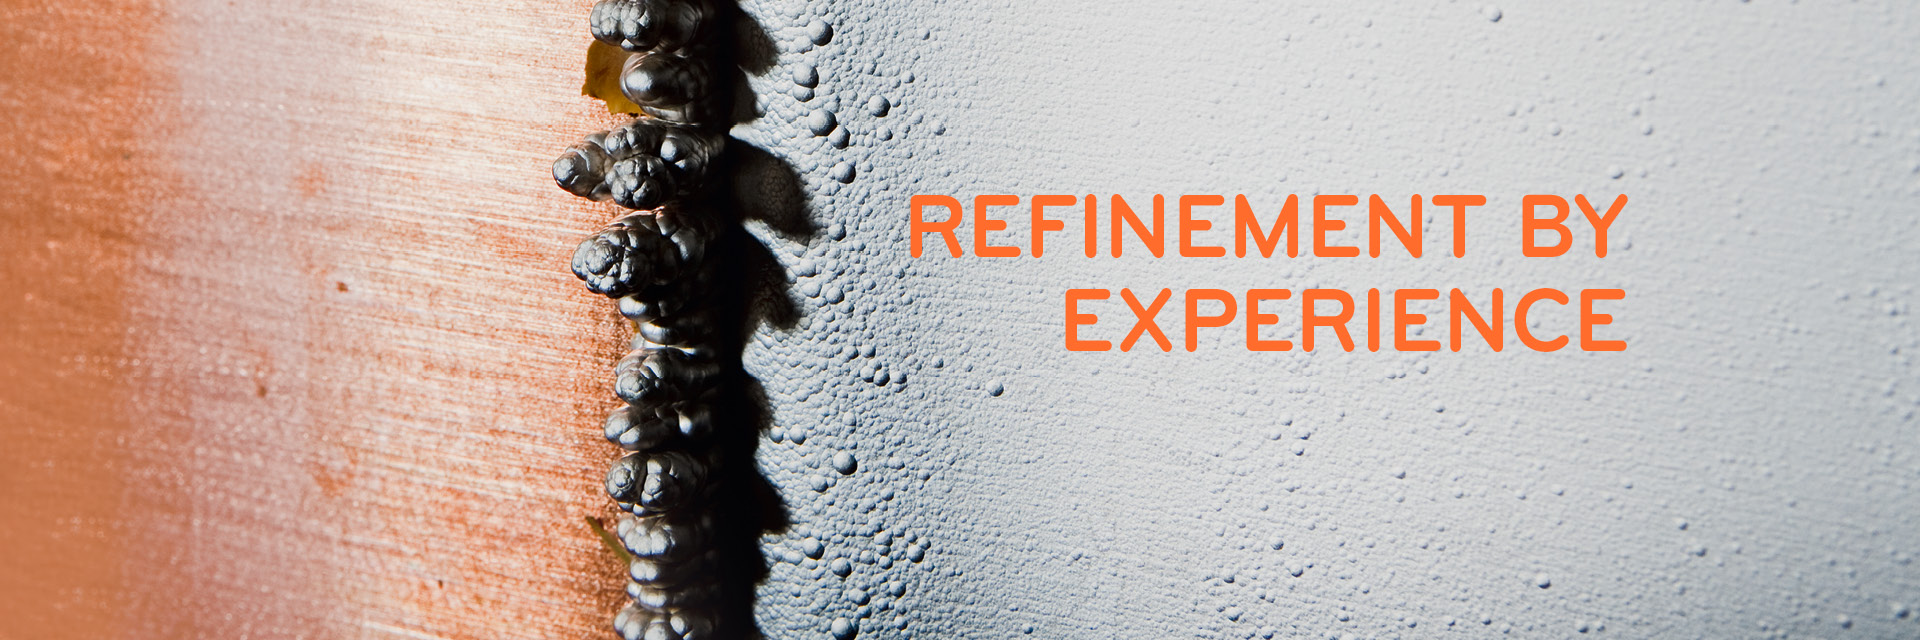 Refinement by experience